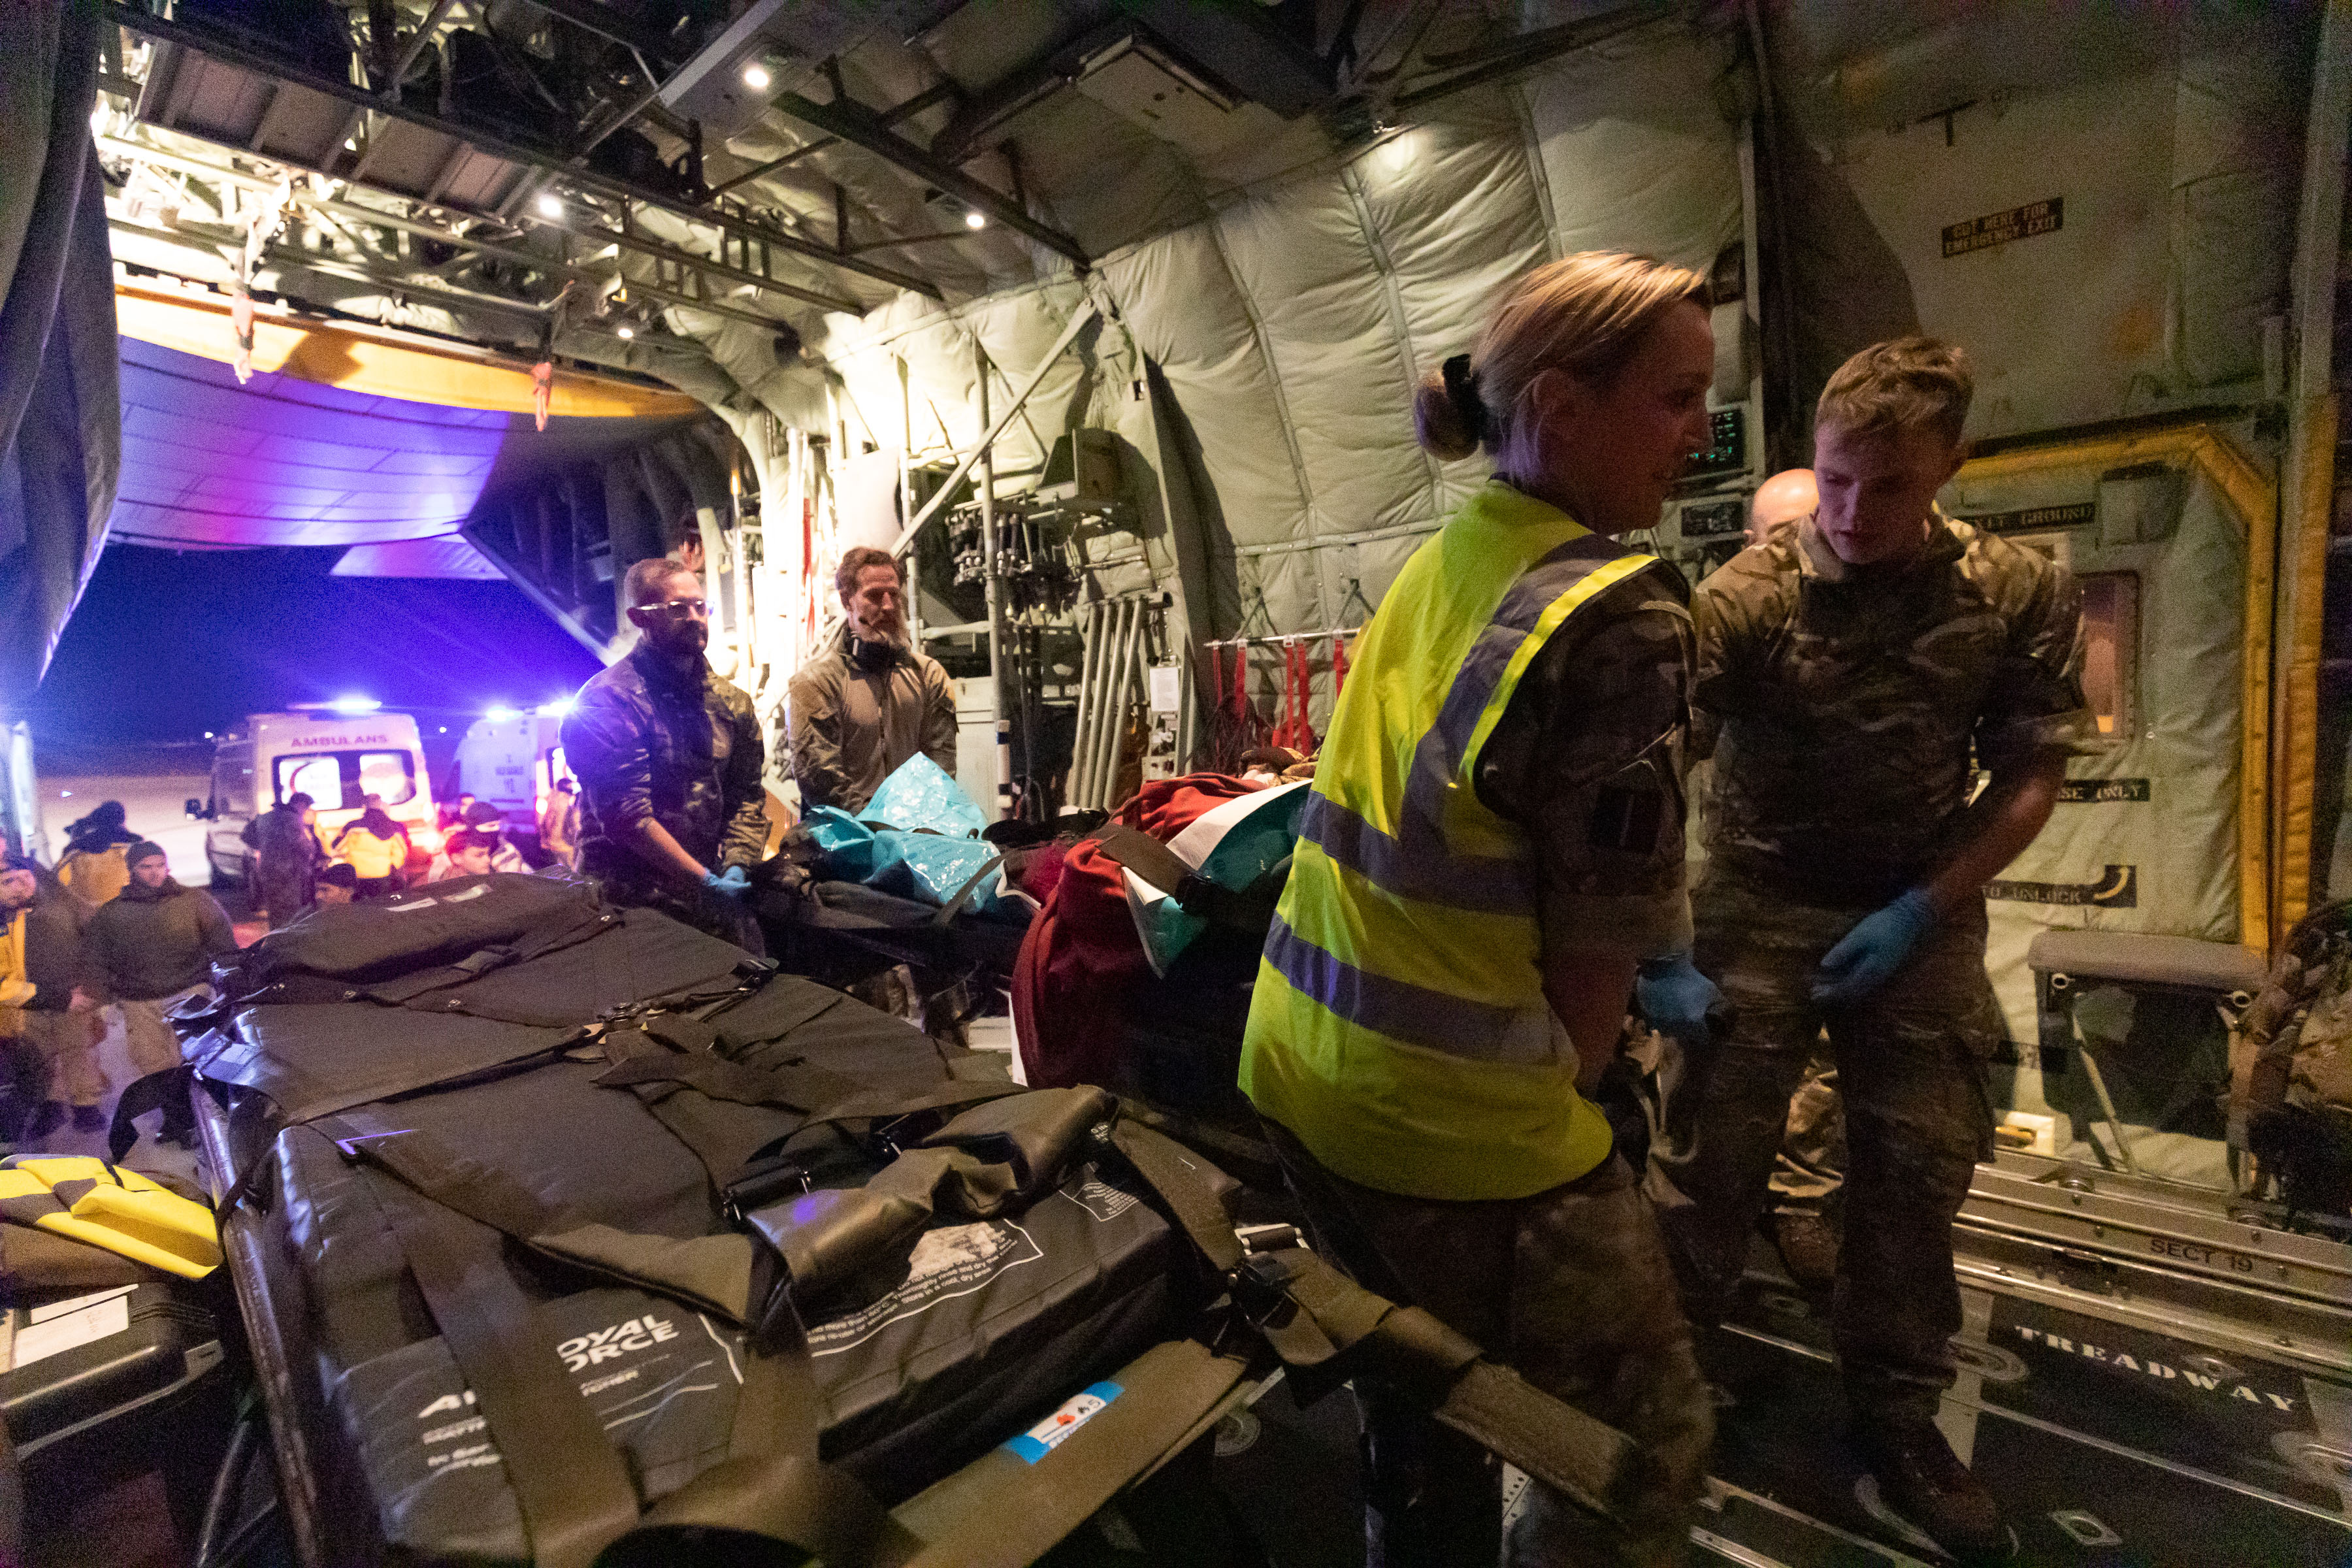 Image shows RAF medics attending to patient inside RAF Hercules aircraft.